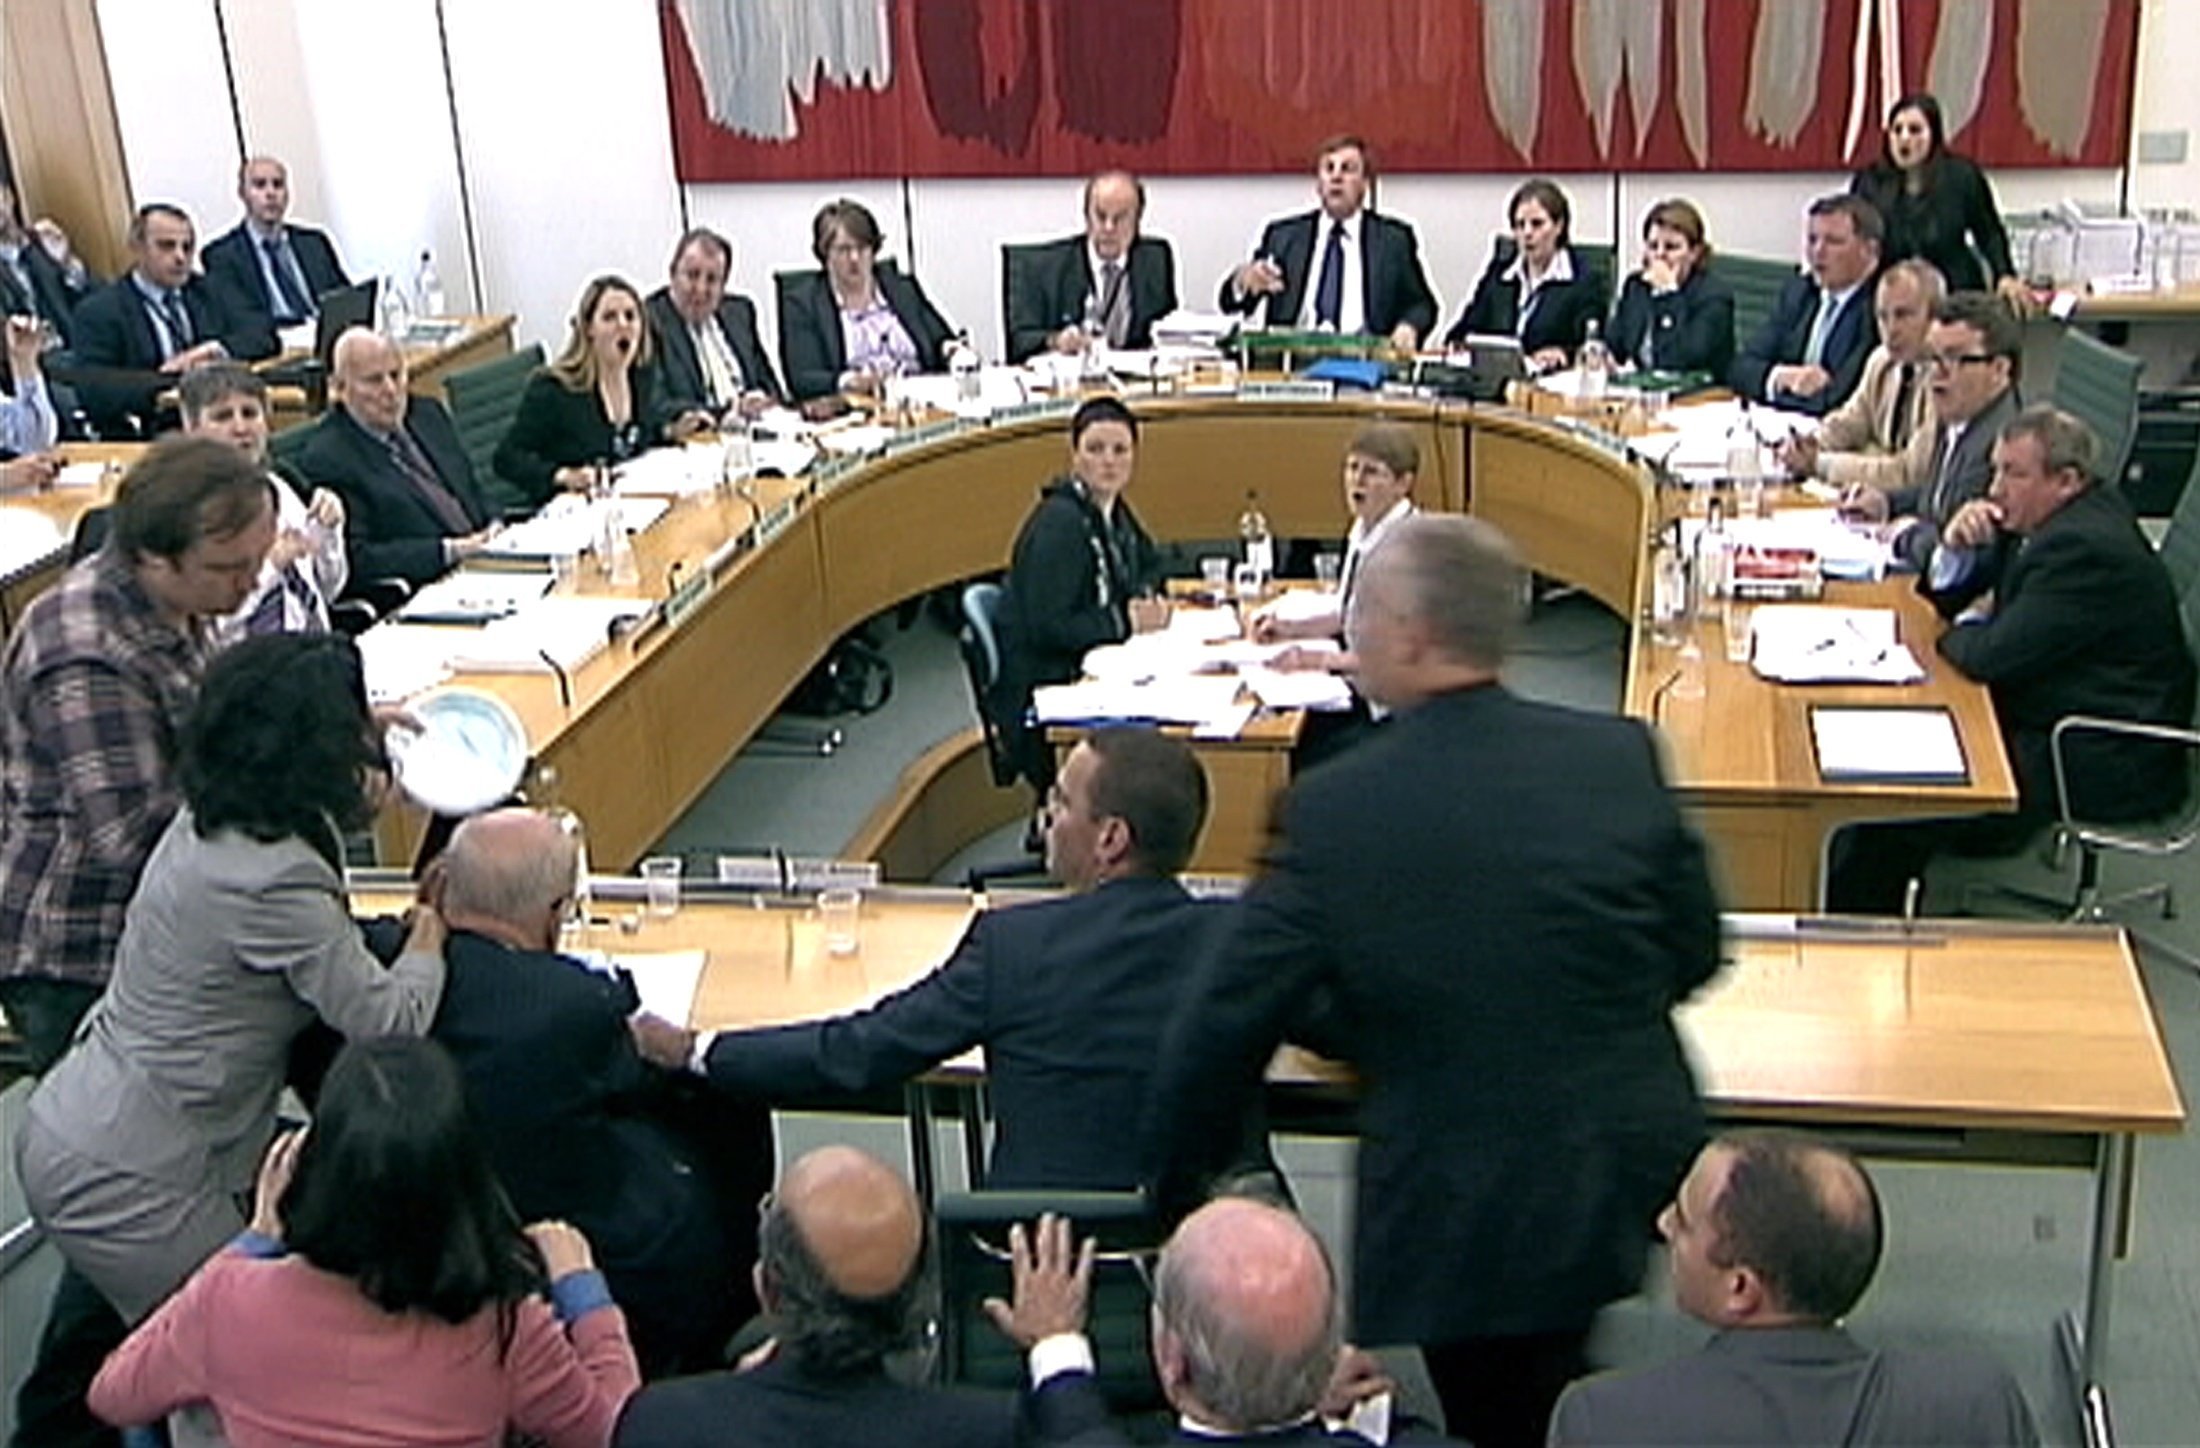 Rupert Murdoch gets pied in the face during a Commons select committee